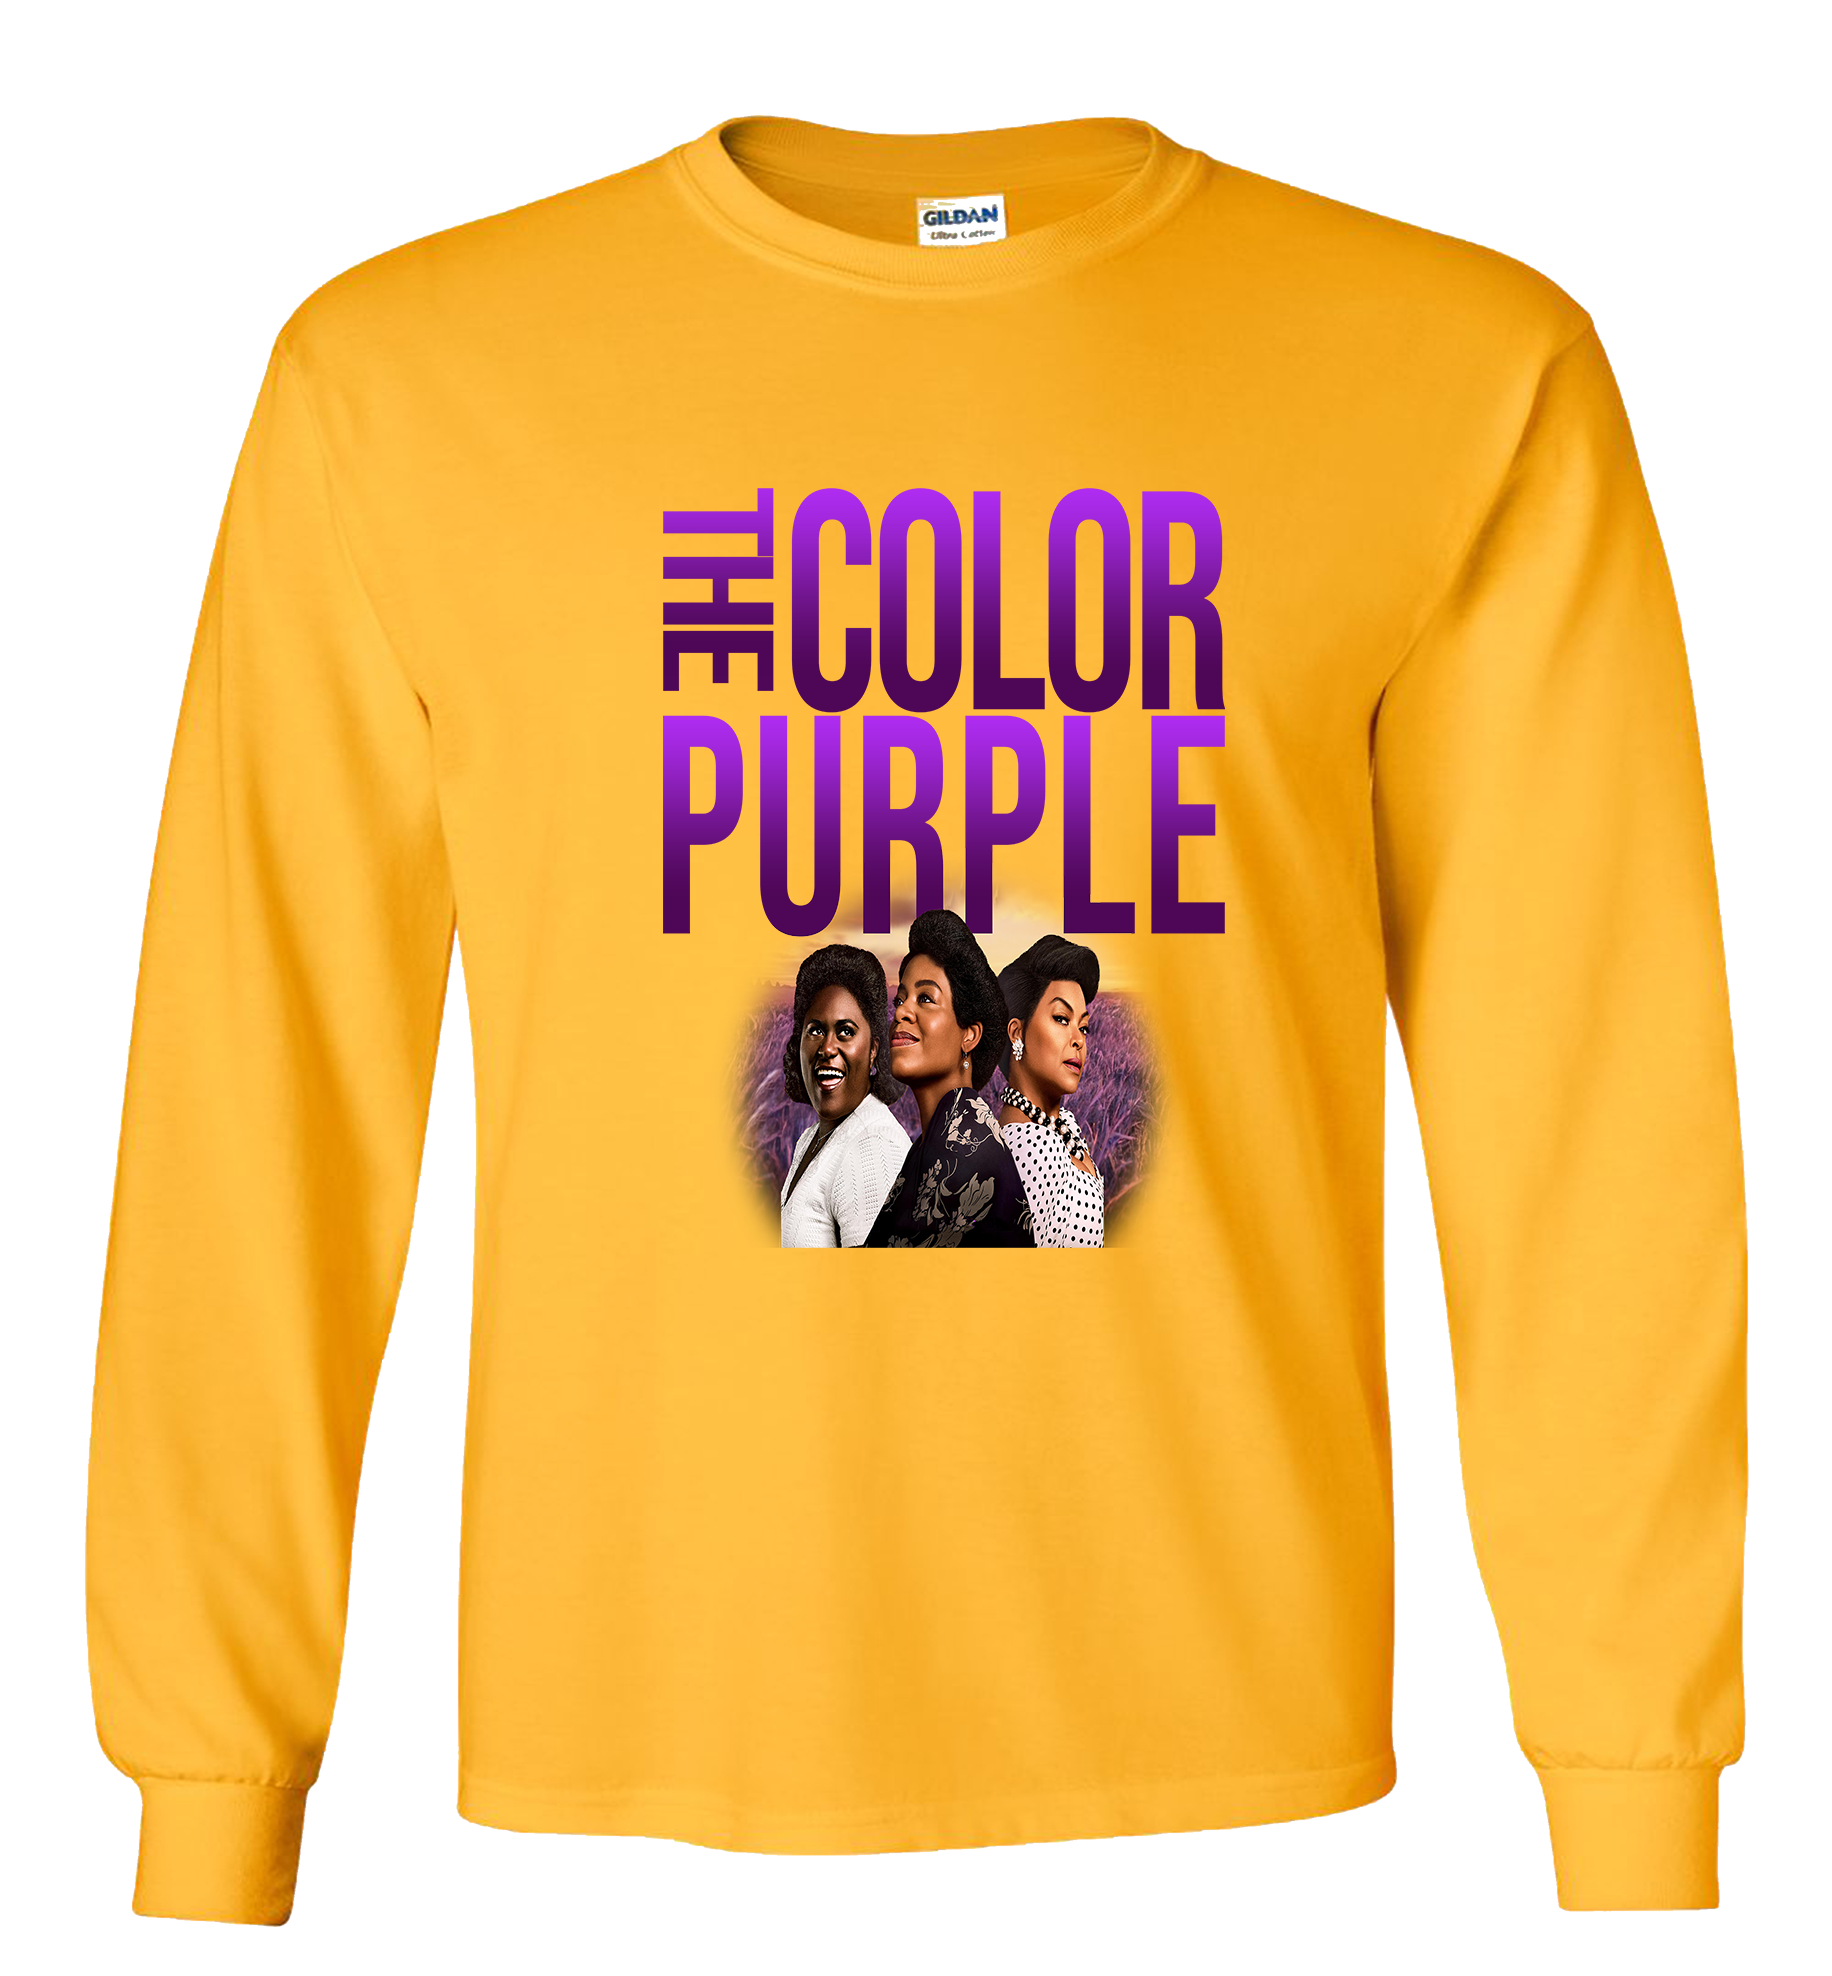 The Color Purple T-Shirt (Long or Short sleeve) – Gwen White